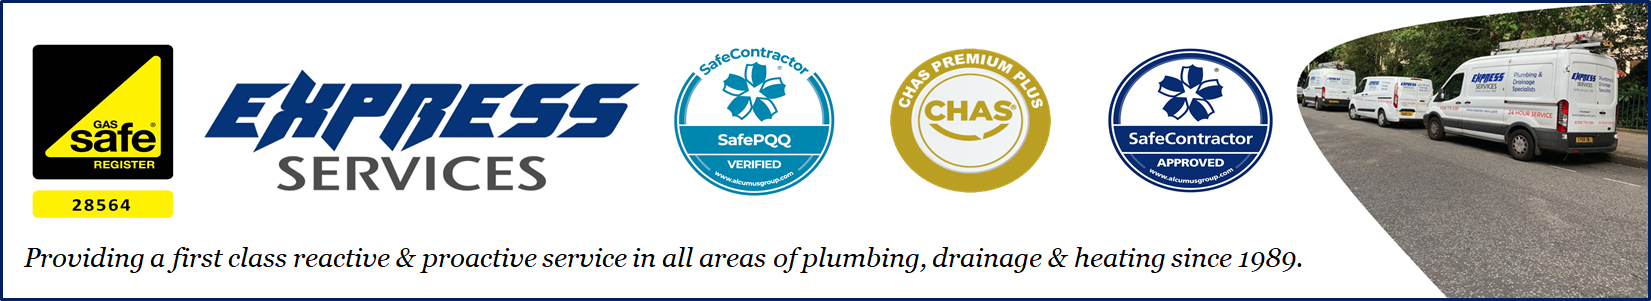 Express Services - Plumbing, Heating & Drainage